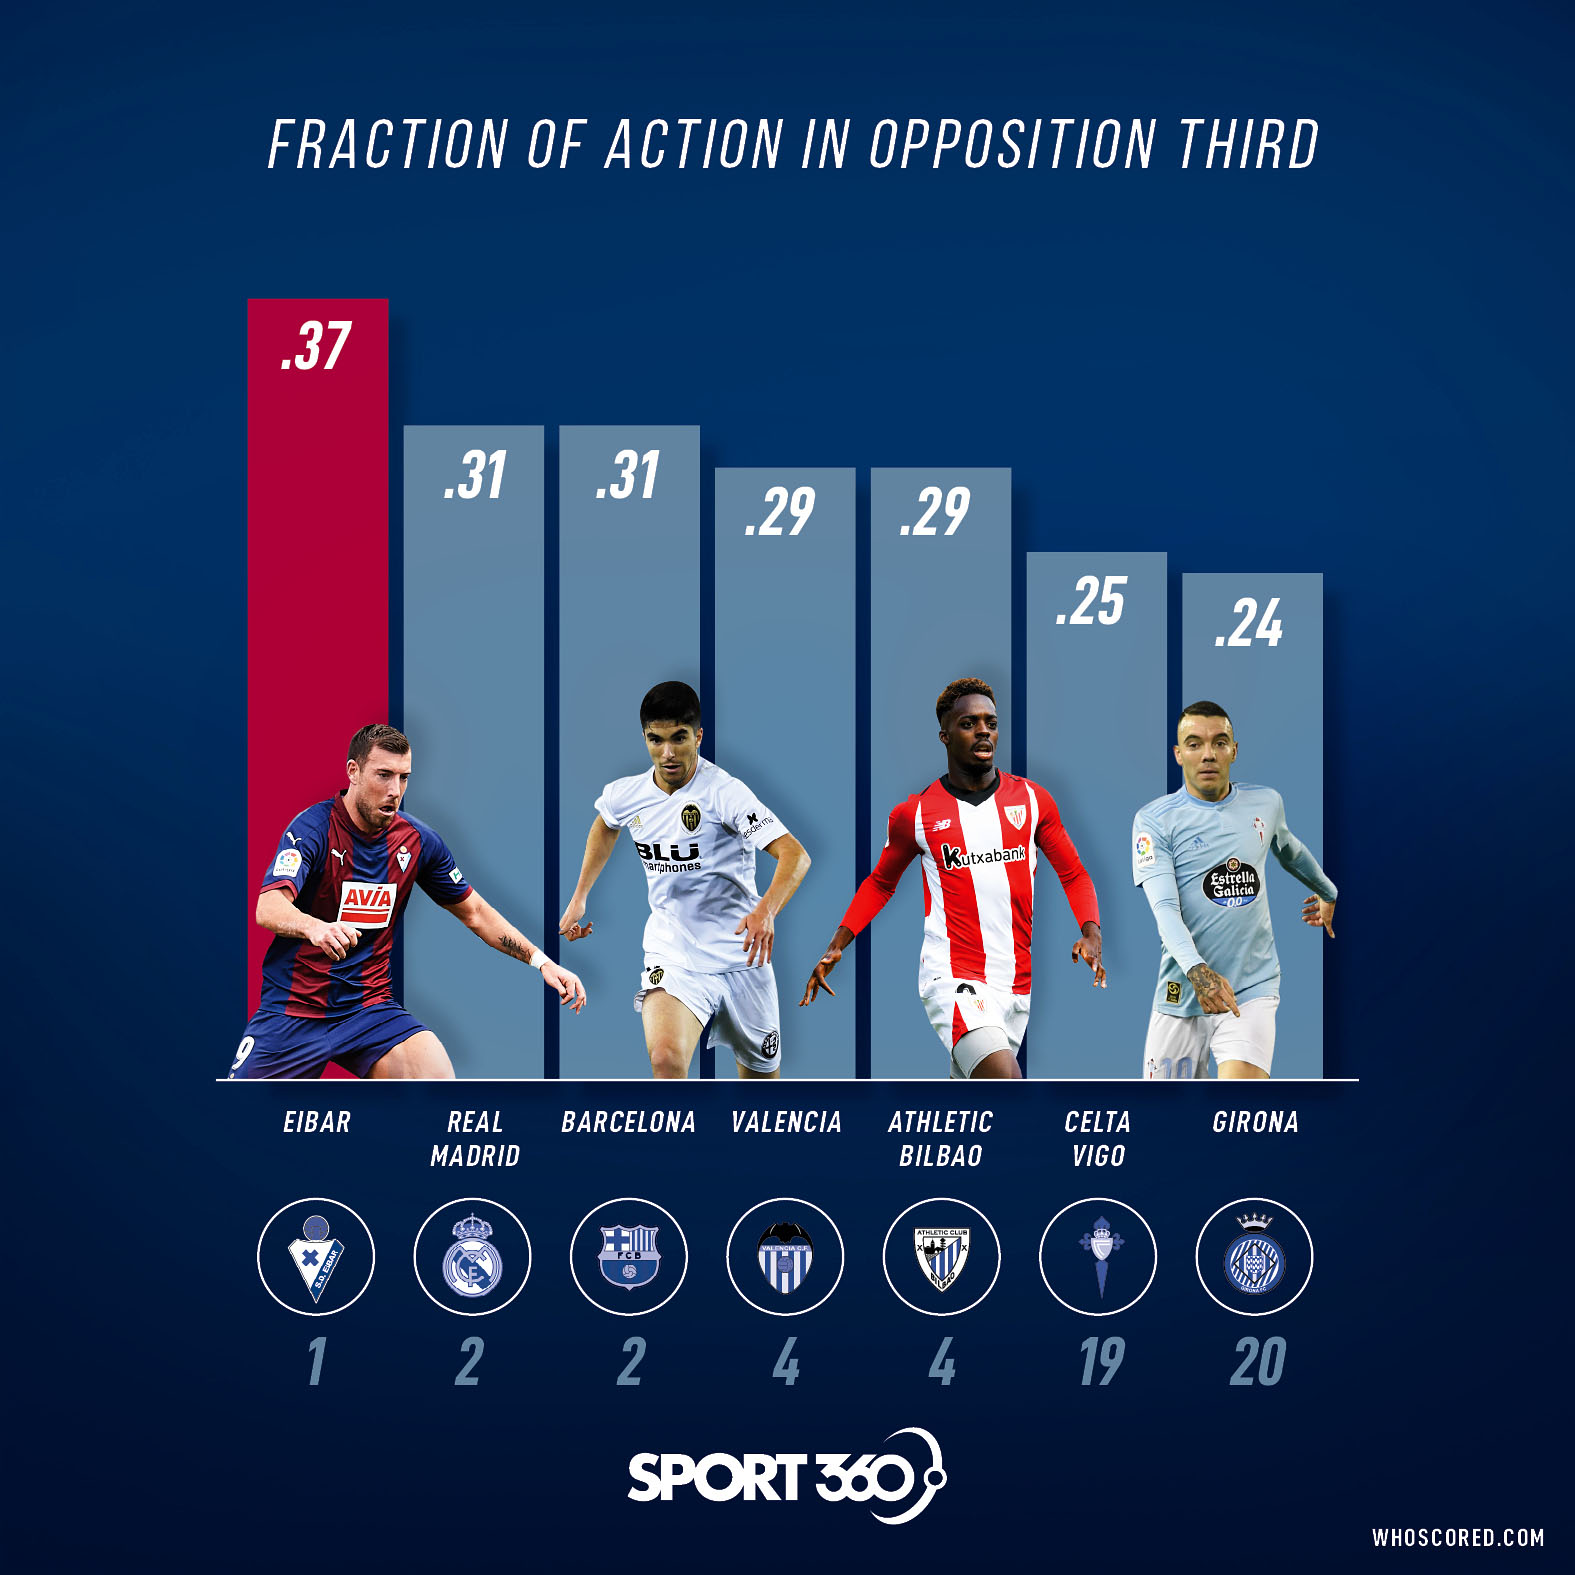 Fraction of action in the opposition third: Eibar leading the race